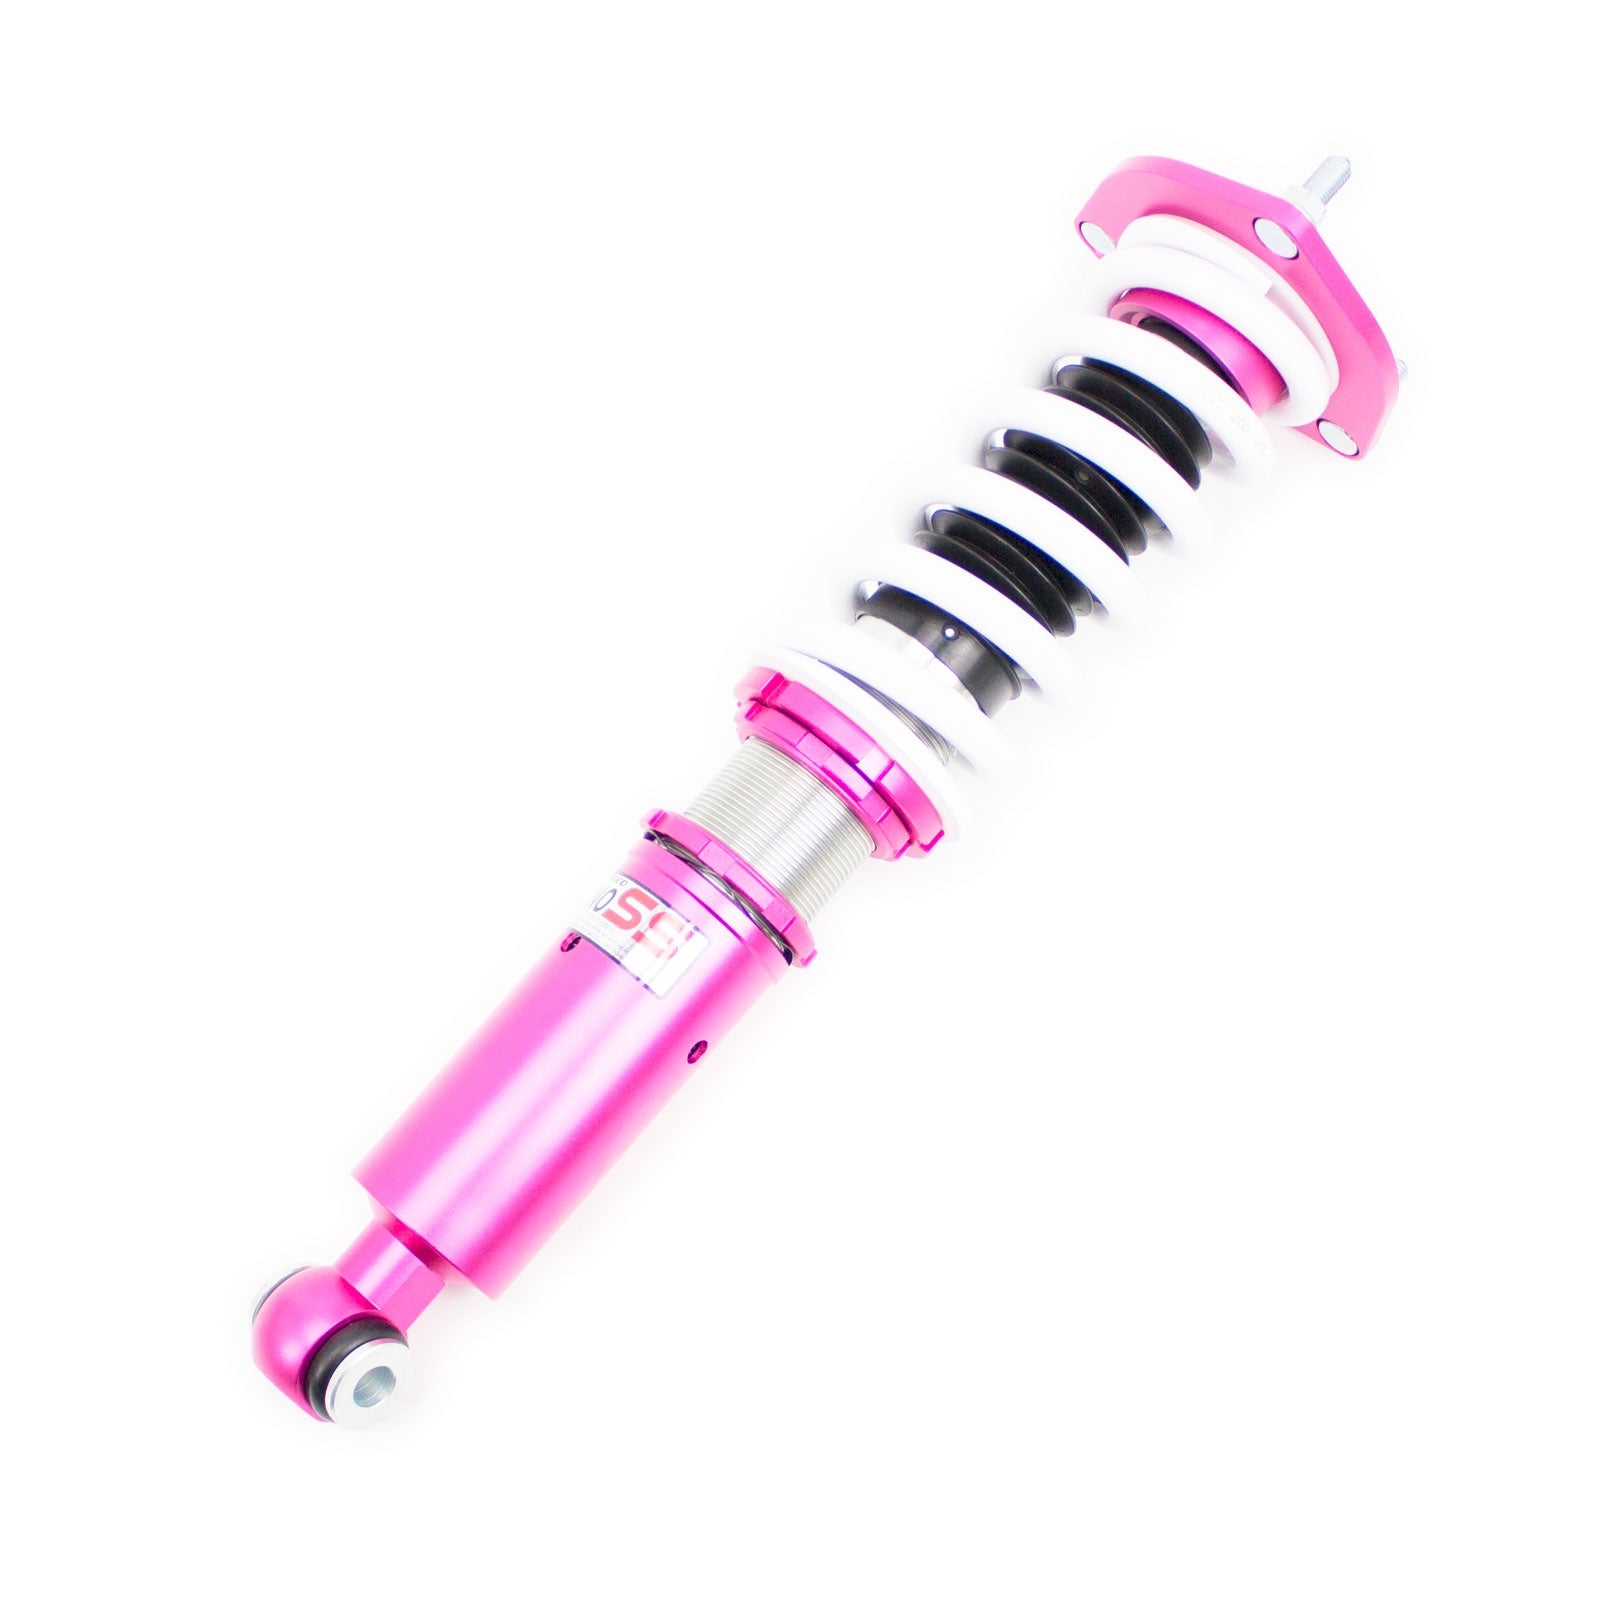 Godspeed MSS0175 MonoSS Coilover Lowering Kit, Fully Adjustable, Ride Height, Spring Tension And 16 Click Damping, Lexus LS400(UCF10) 90-94